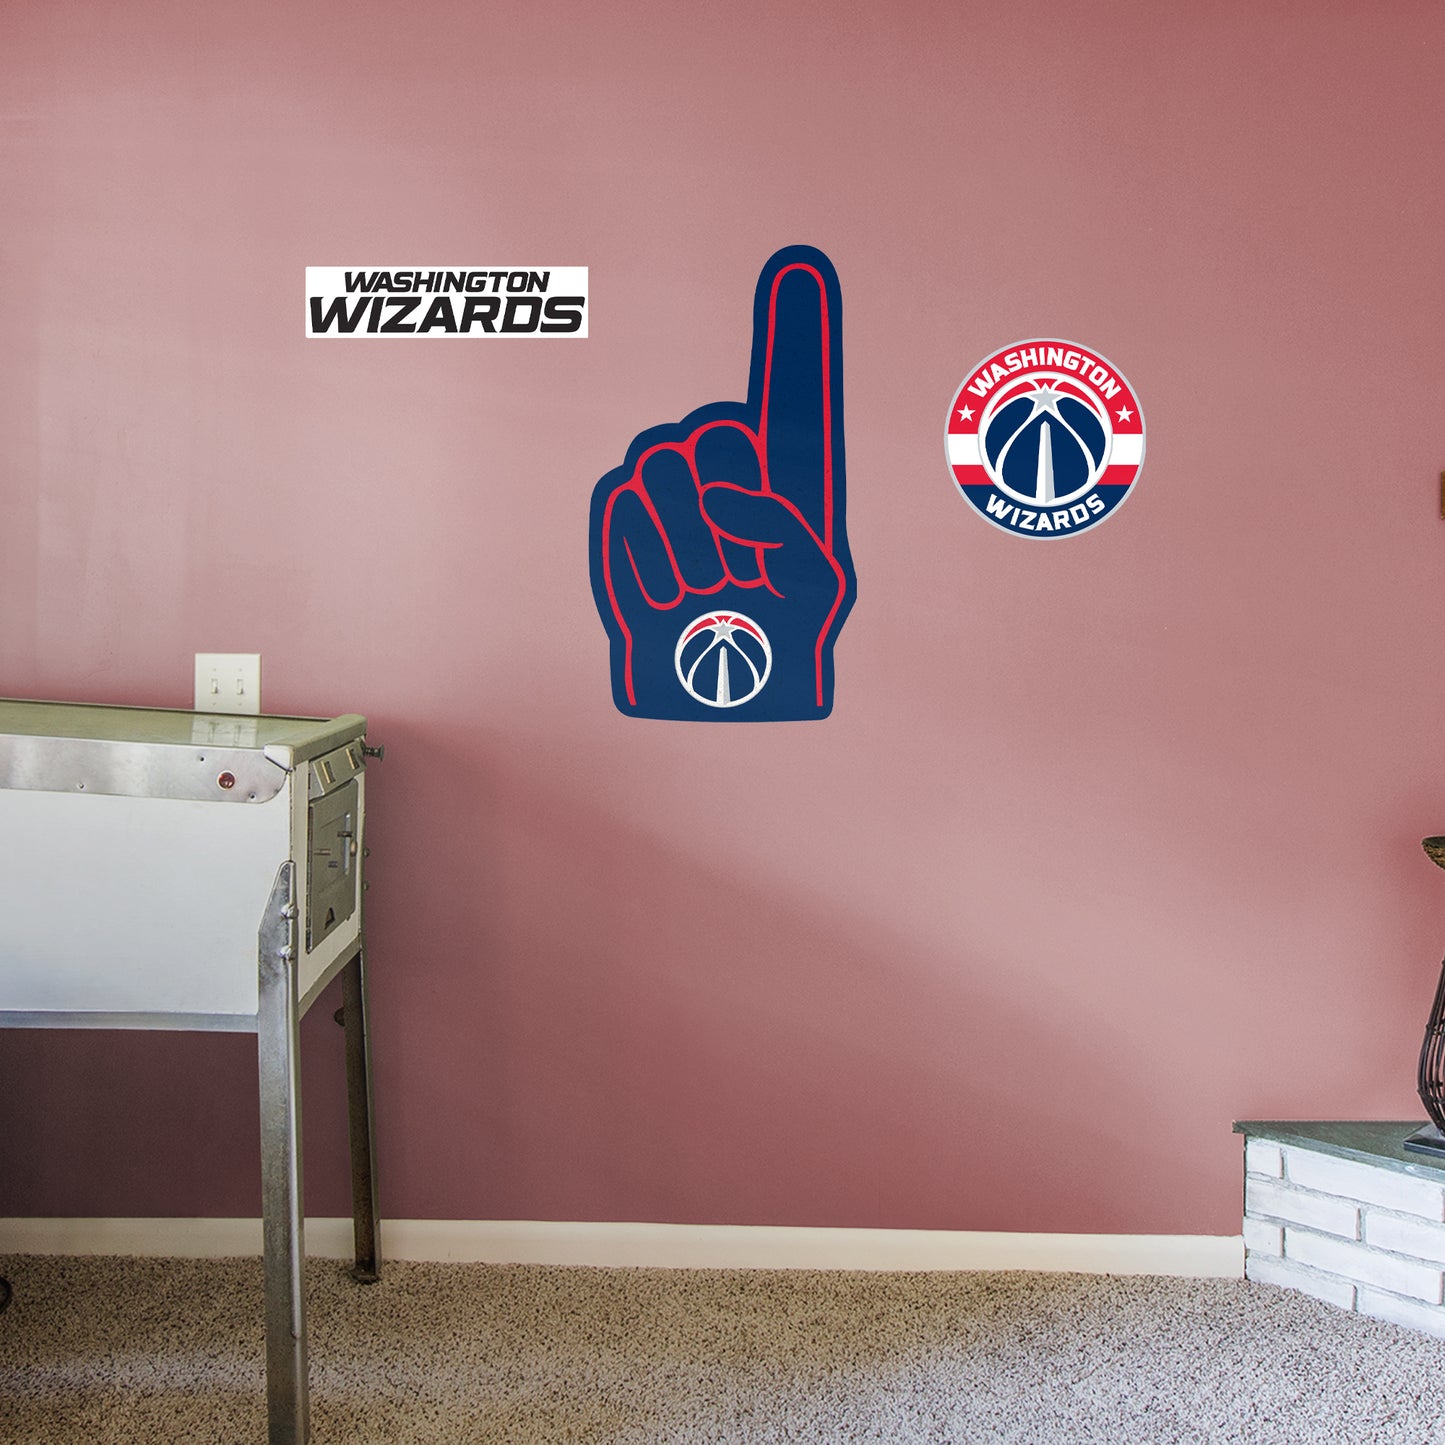 Washington Wizards: Foam Finger - Officially Licensed NBA Removable Adhesive Decal